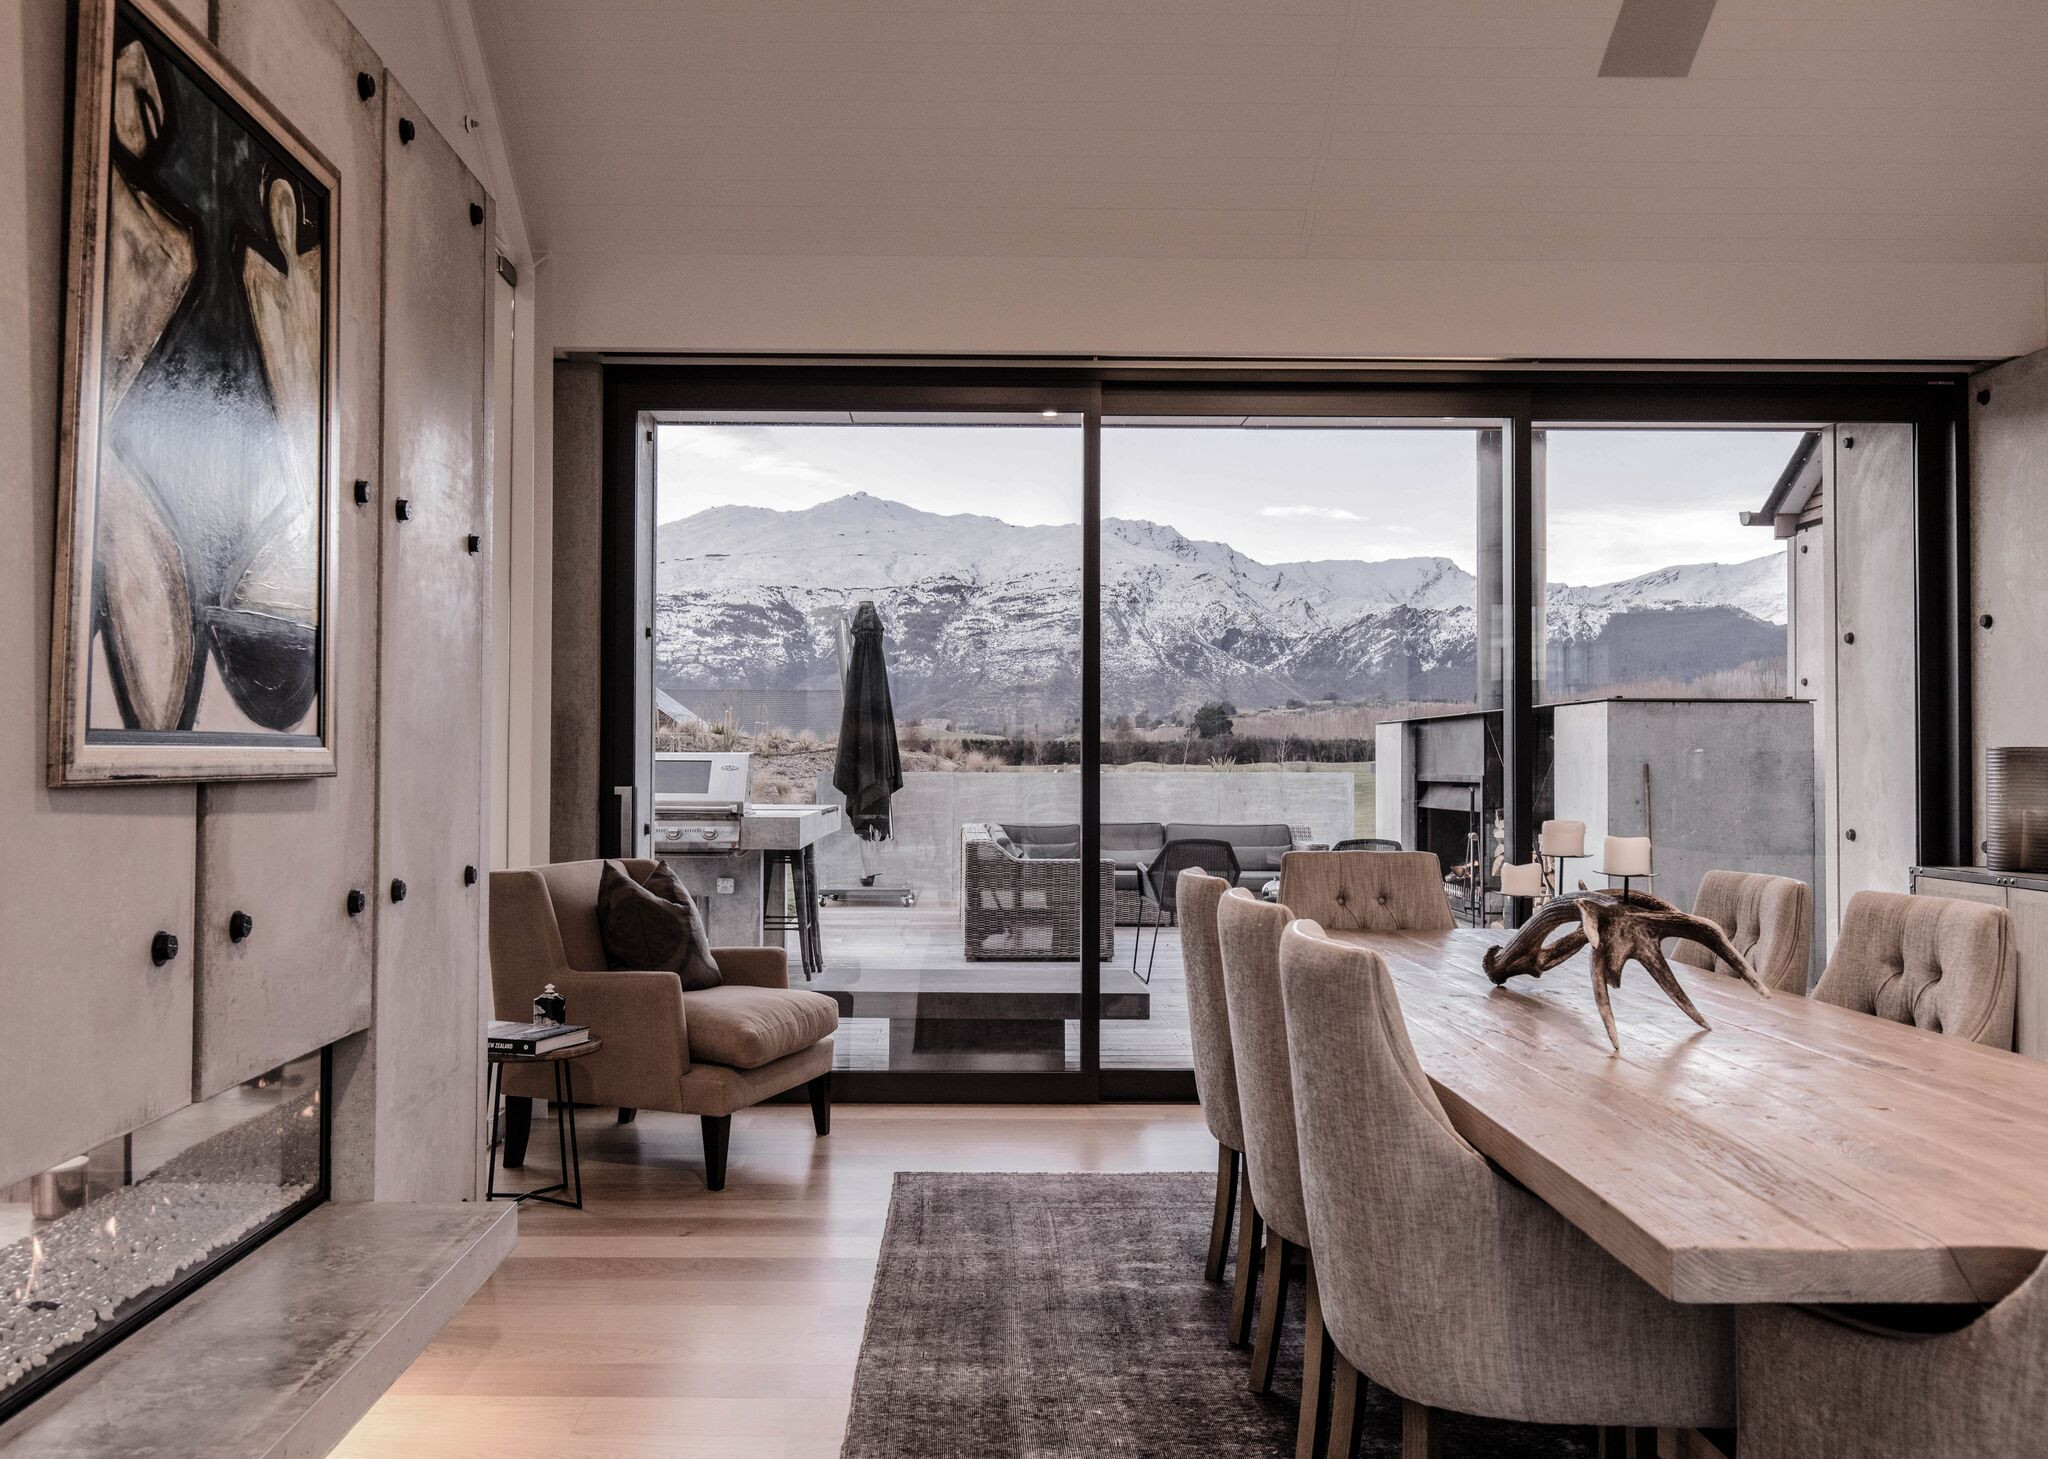 A cozy dining room with a breathtaking mountain view